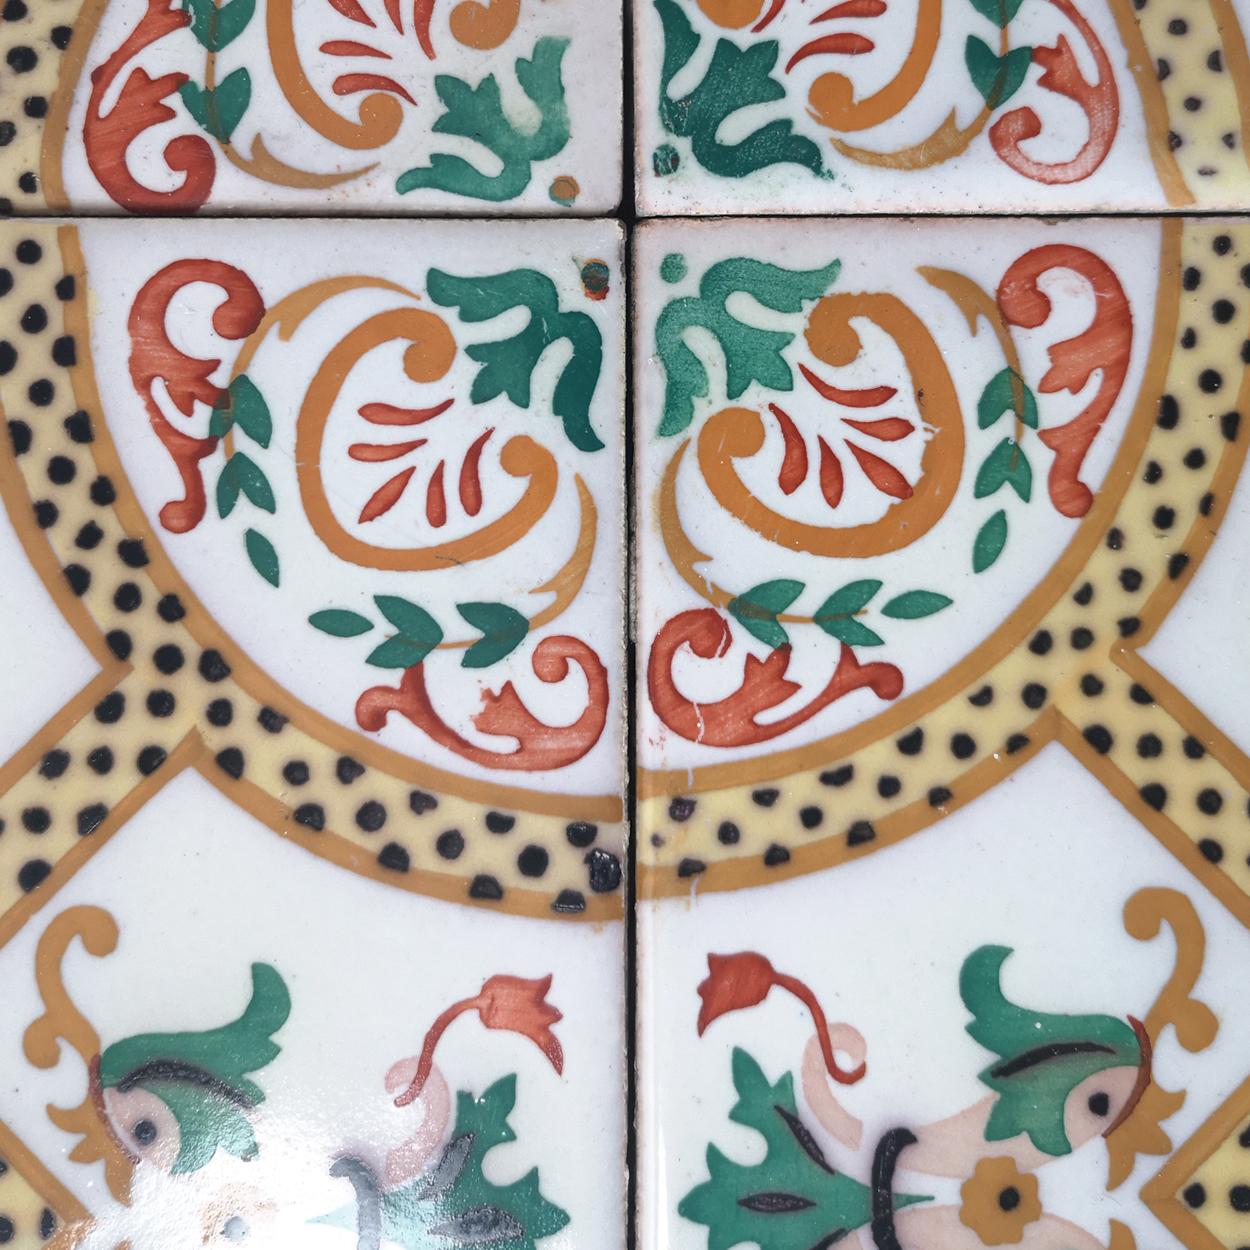 34 pcs. exceptional antique wall tiles, white with image of a fish (Onda, Spain Valencia). 
The dimensions per tile are inch 8